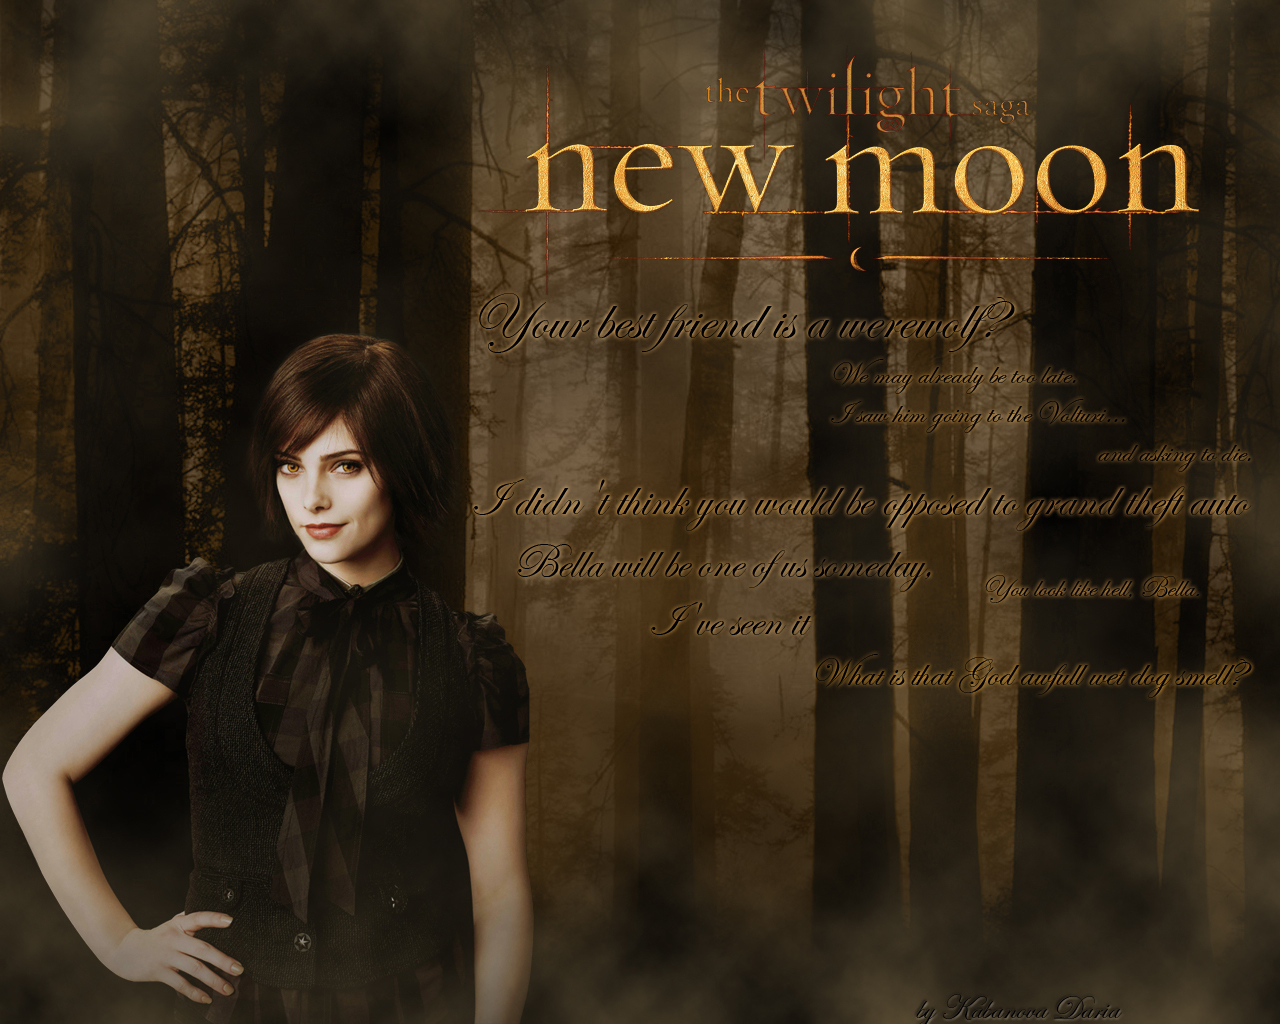 Twilight Crep Sculo Ashley Greene Alice Cullen Like Official New Moon